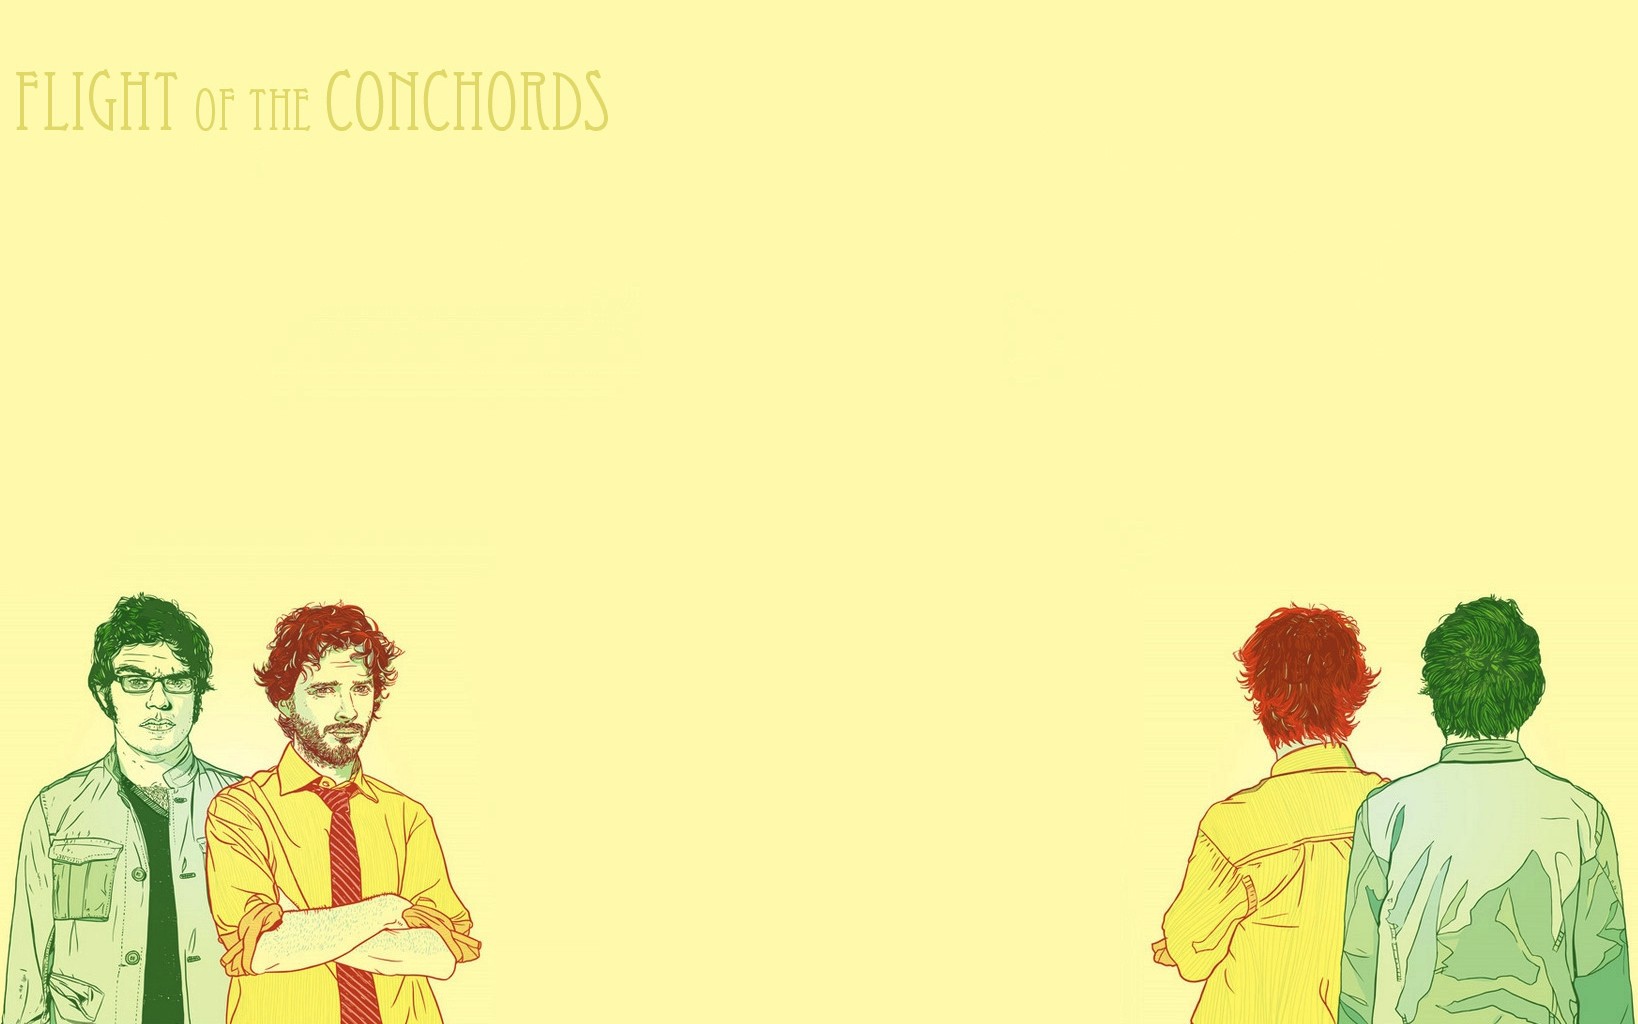 General 1638x1024 music Flight of the Conchords simple background men tie yellow background